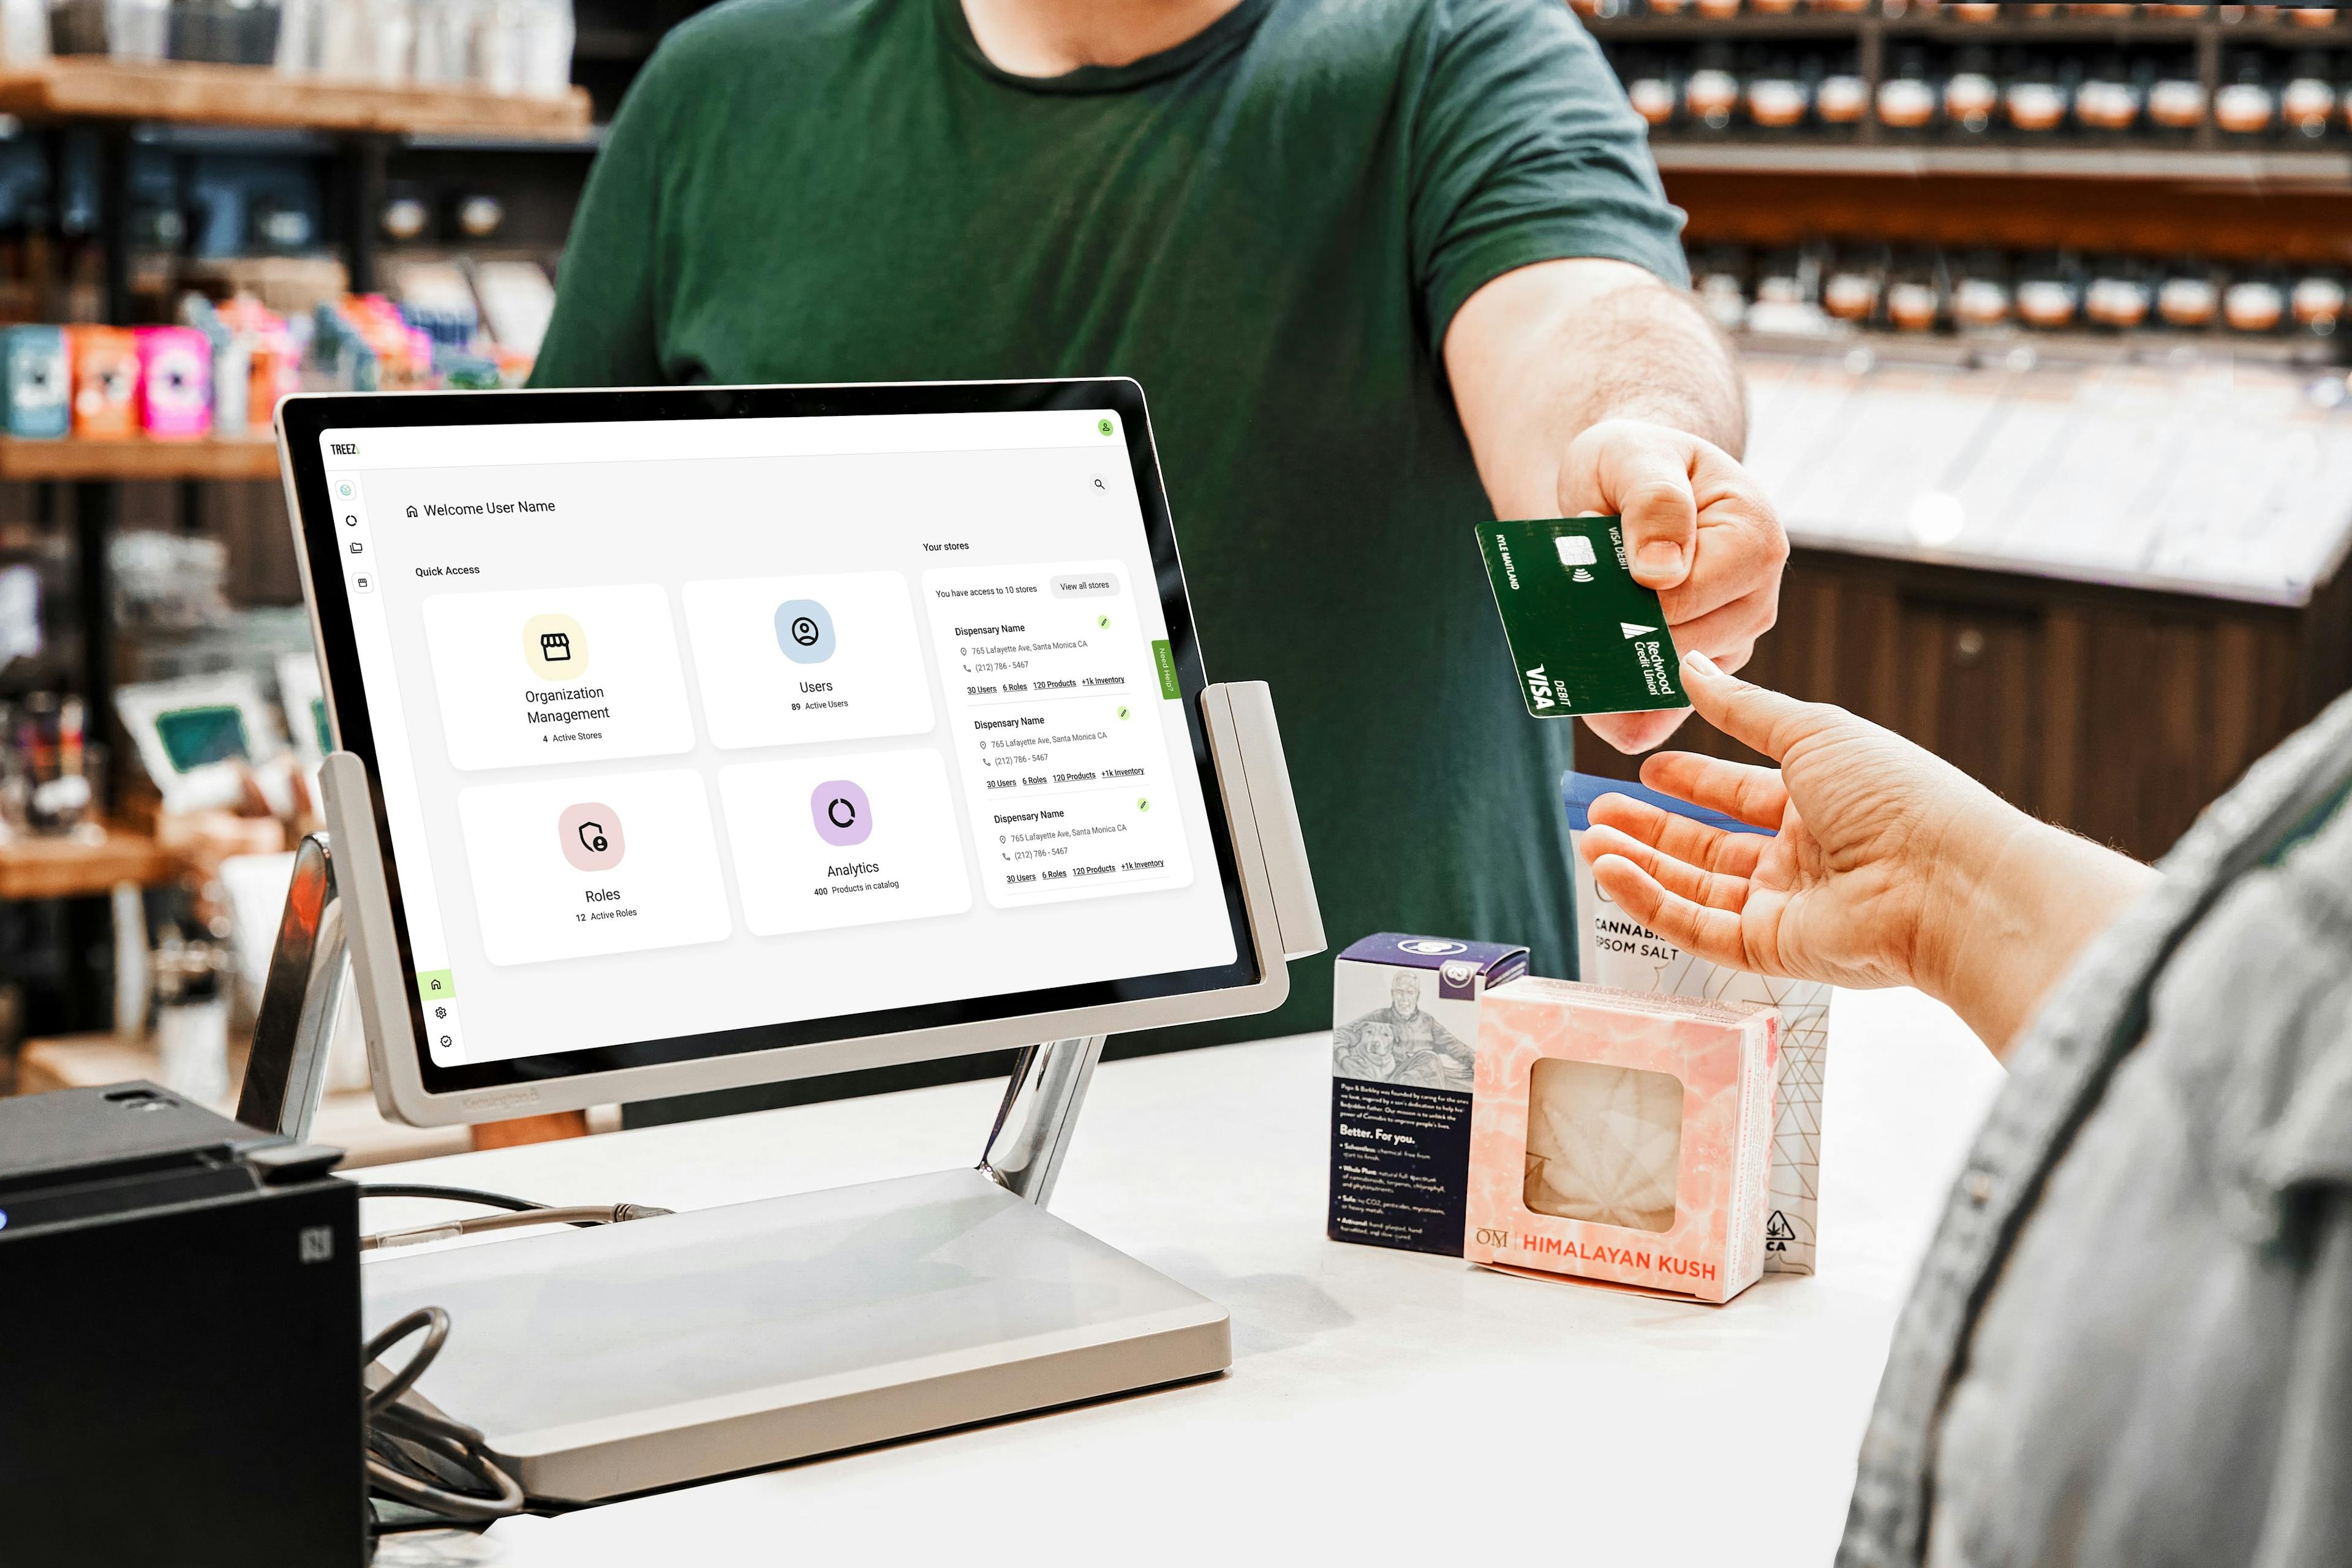 A person passes their debit card to a dispensary employee. A computer displays a POS system with analytics, roles, stores and users. Products including bath bombs and cannabis epsom salt are being purchased.